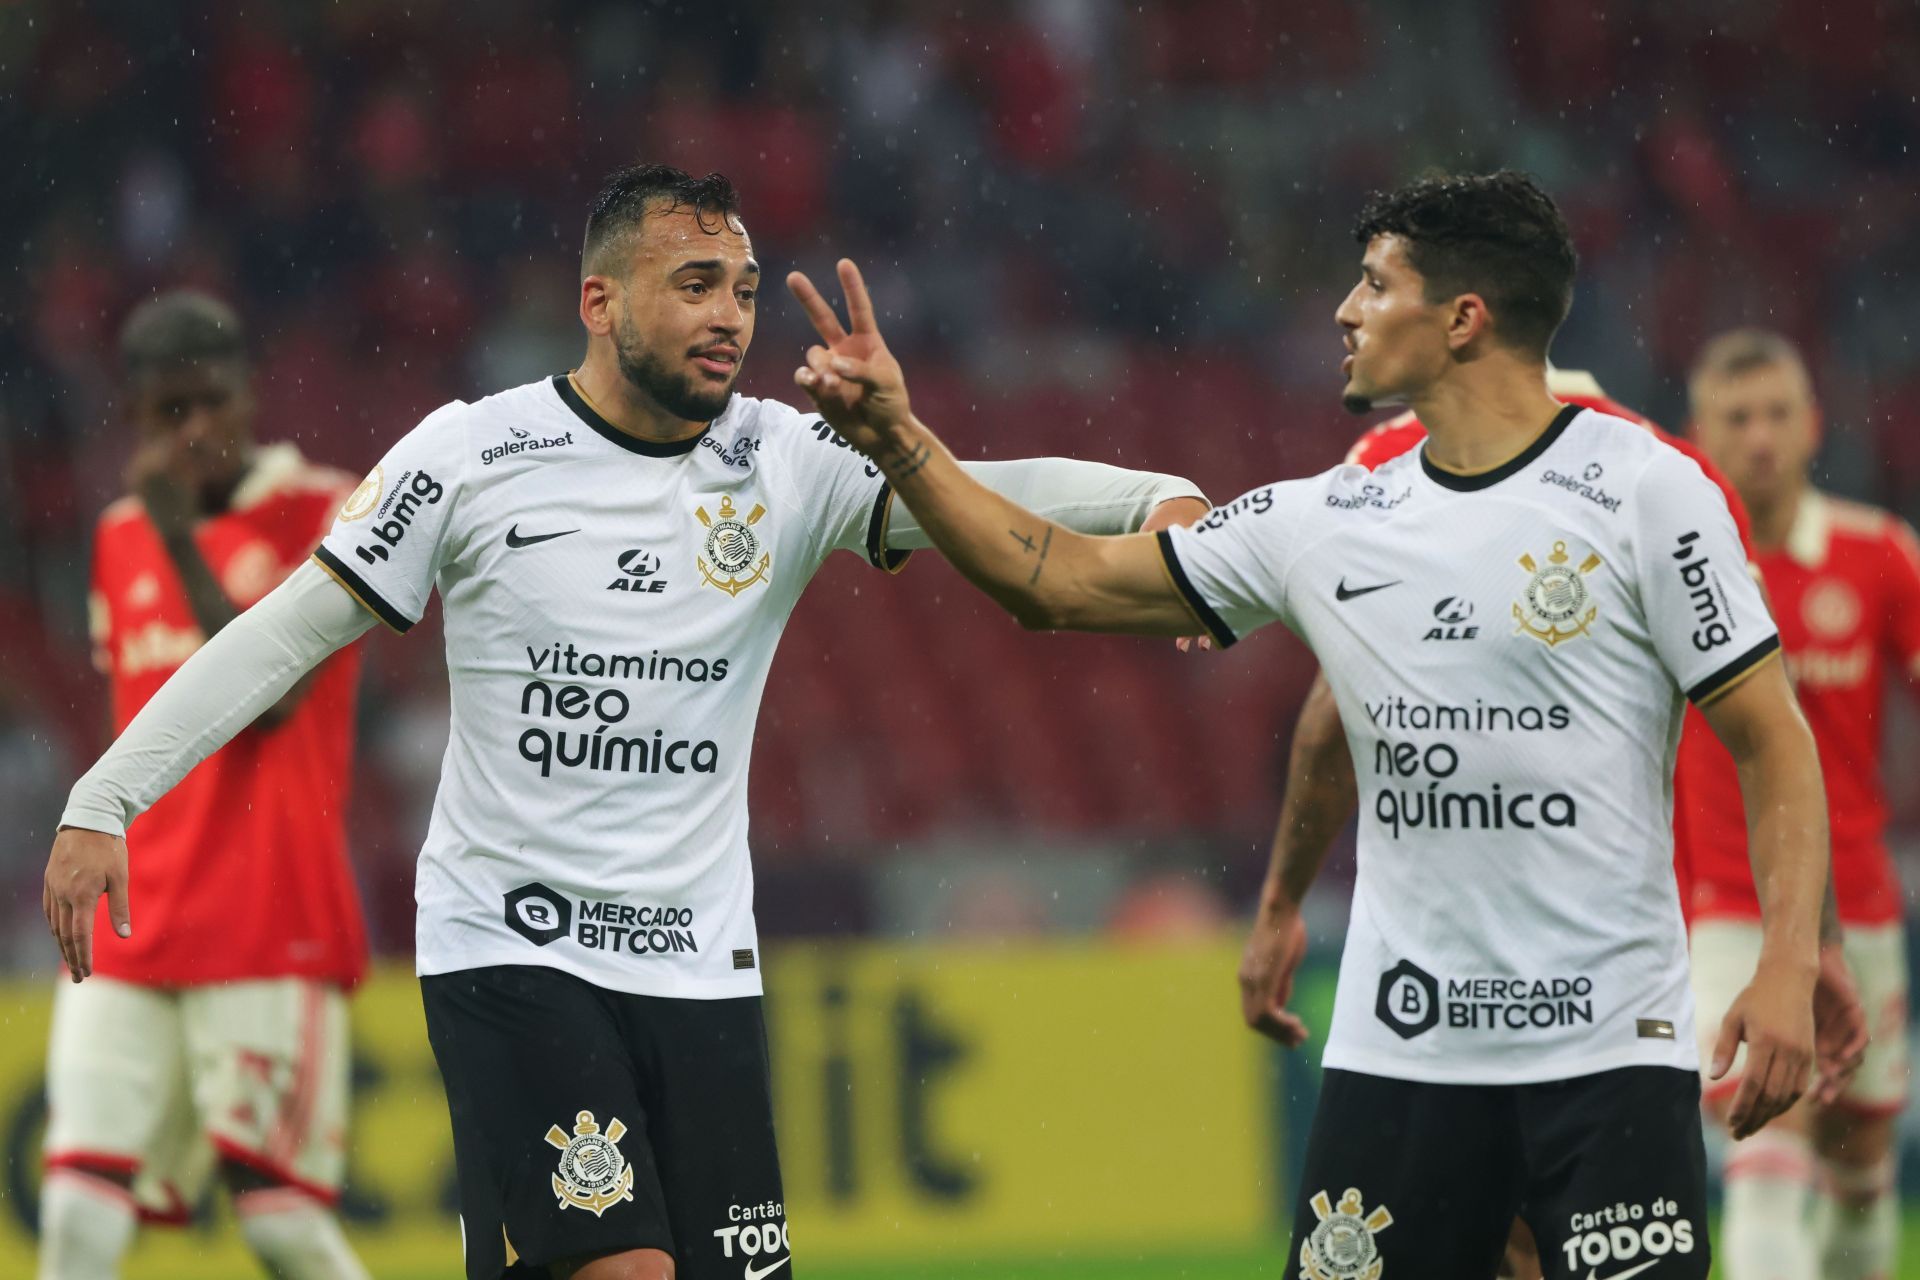 Corinthians come into this game on the back of a 2-2 draw against Internacional.